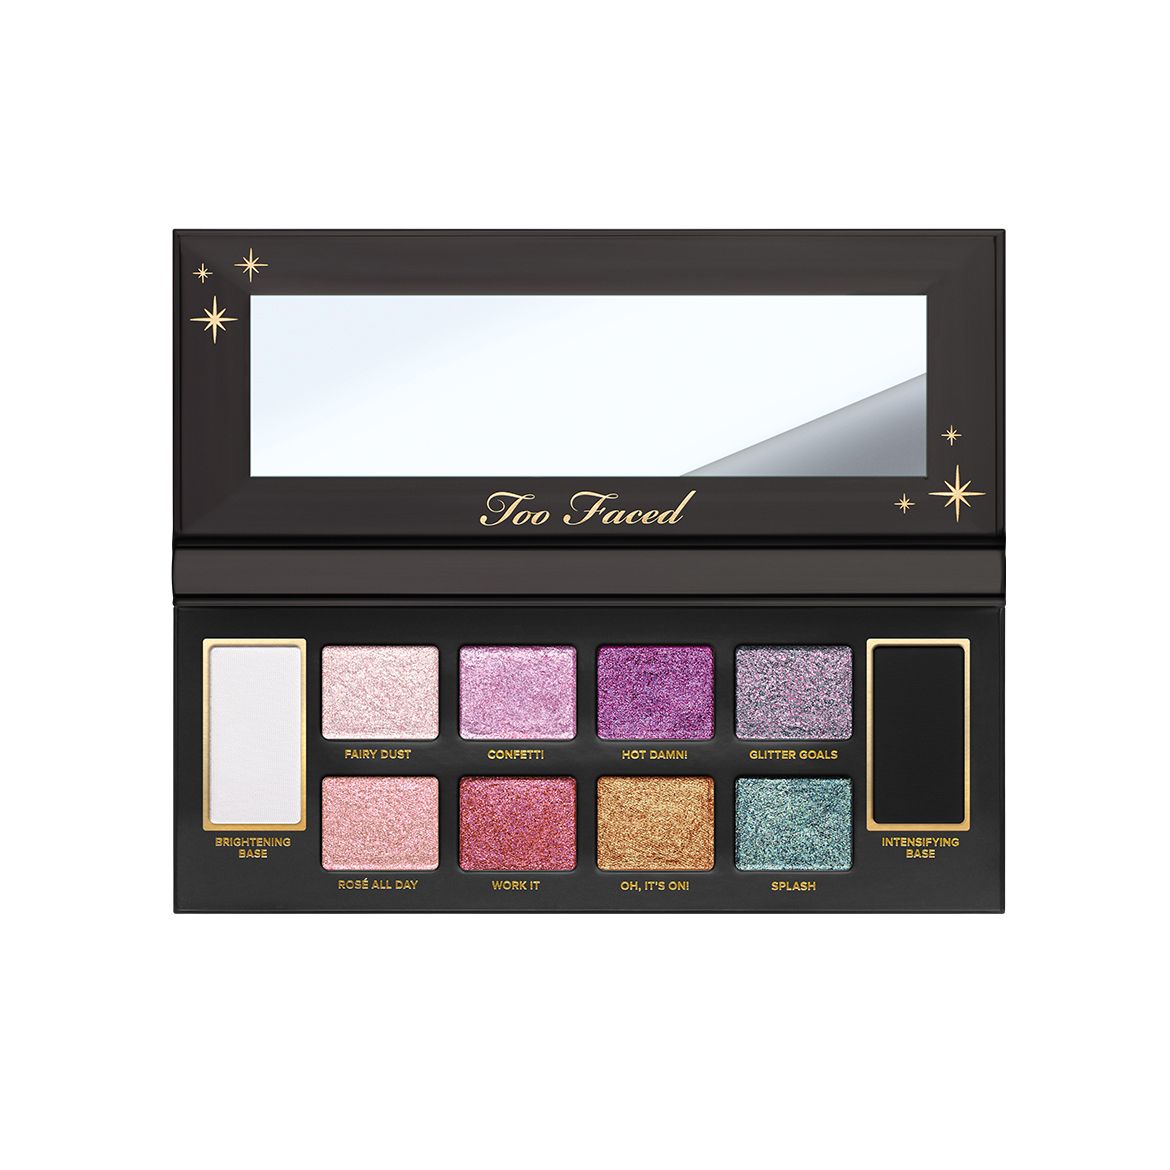 Too Faced Cosmetics New Glitter Bomb Eyeshadow Palette